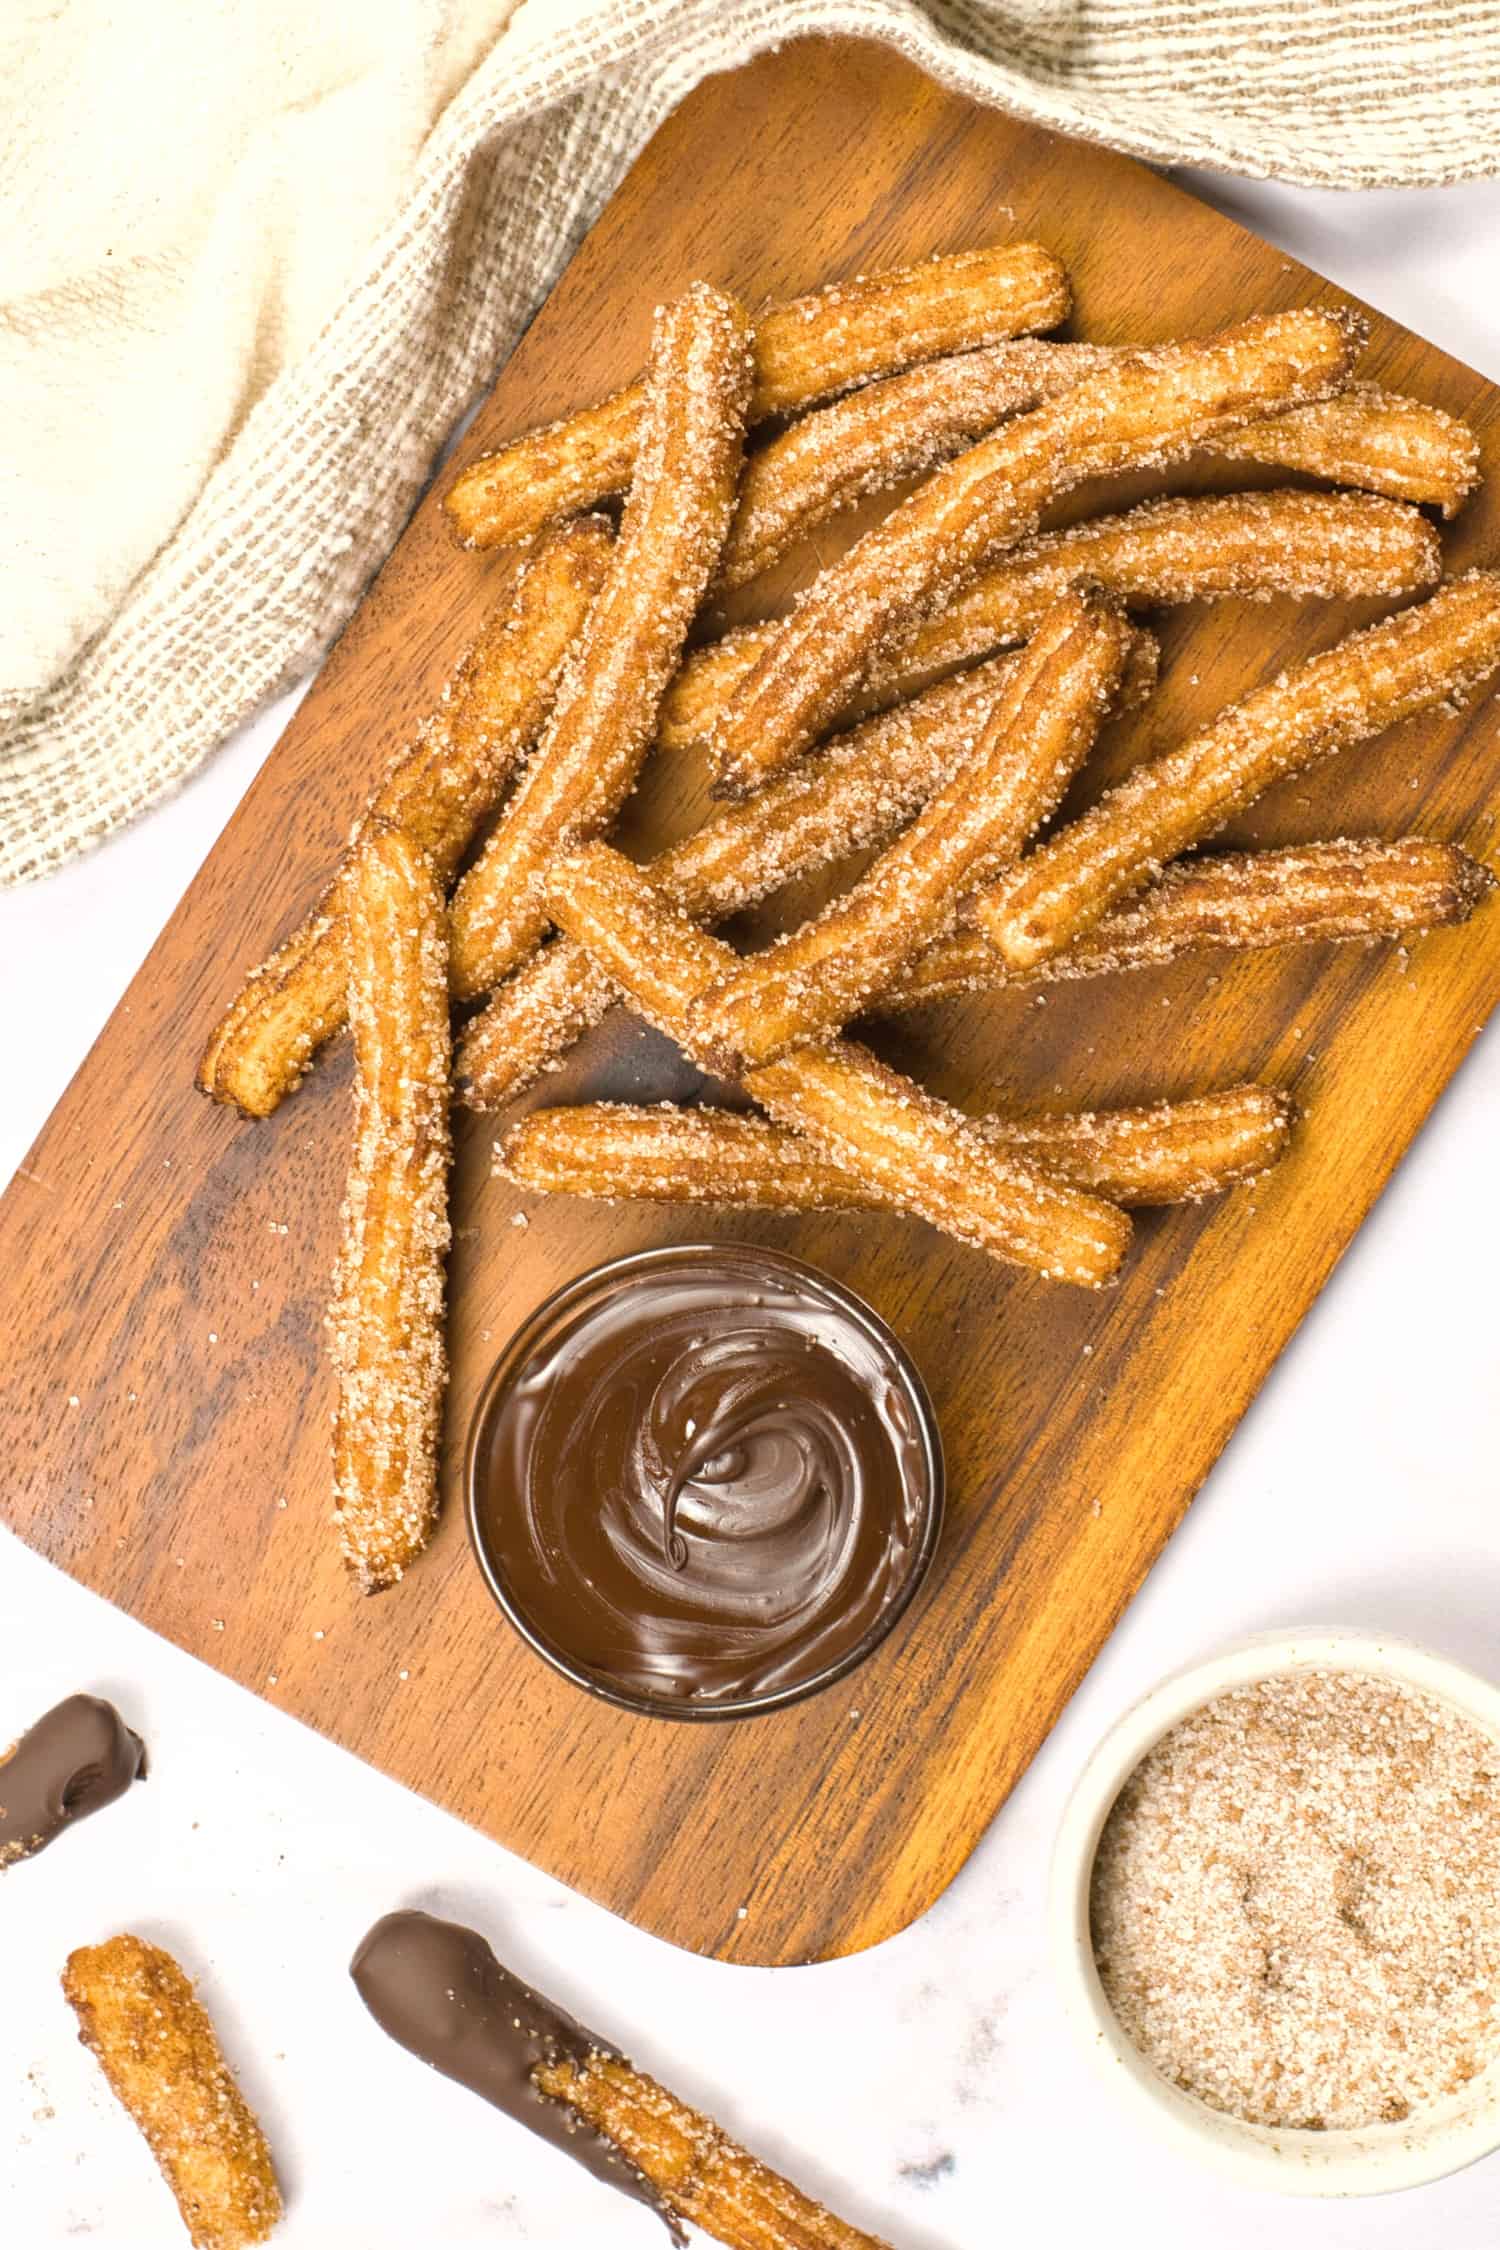 Top down view of a wooden board with gluten free churros and chocolate.